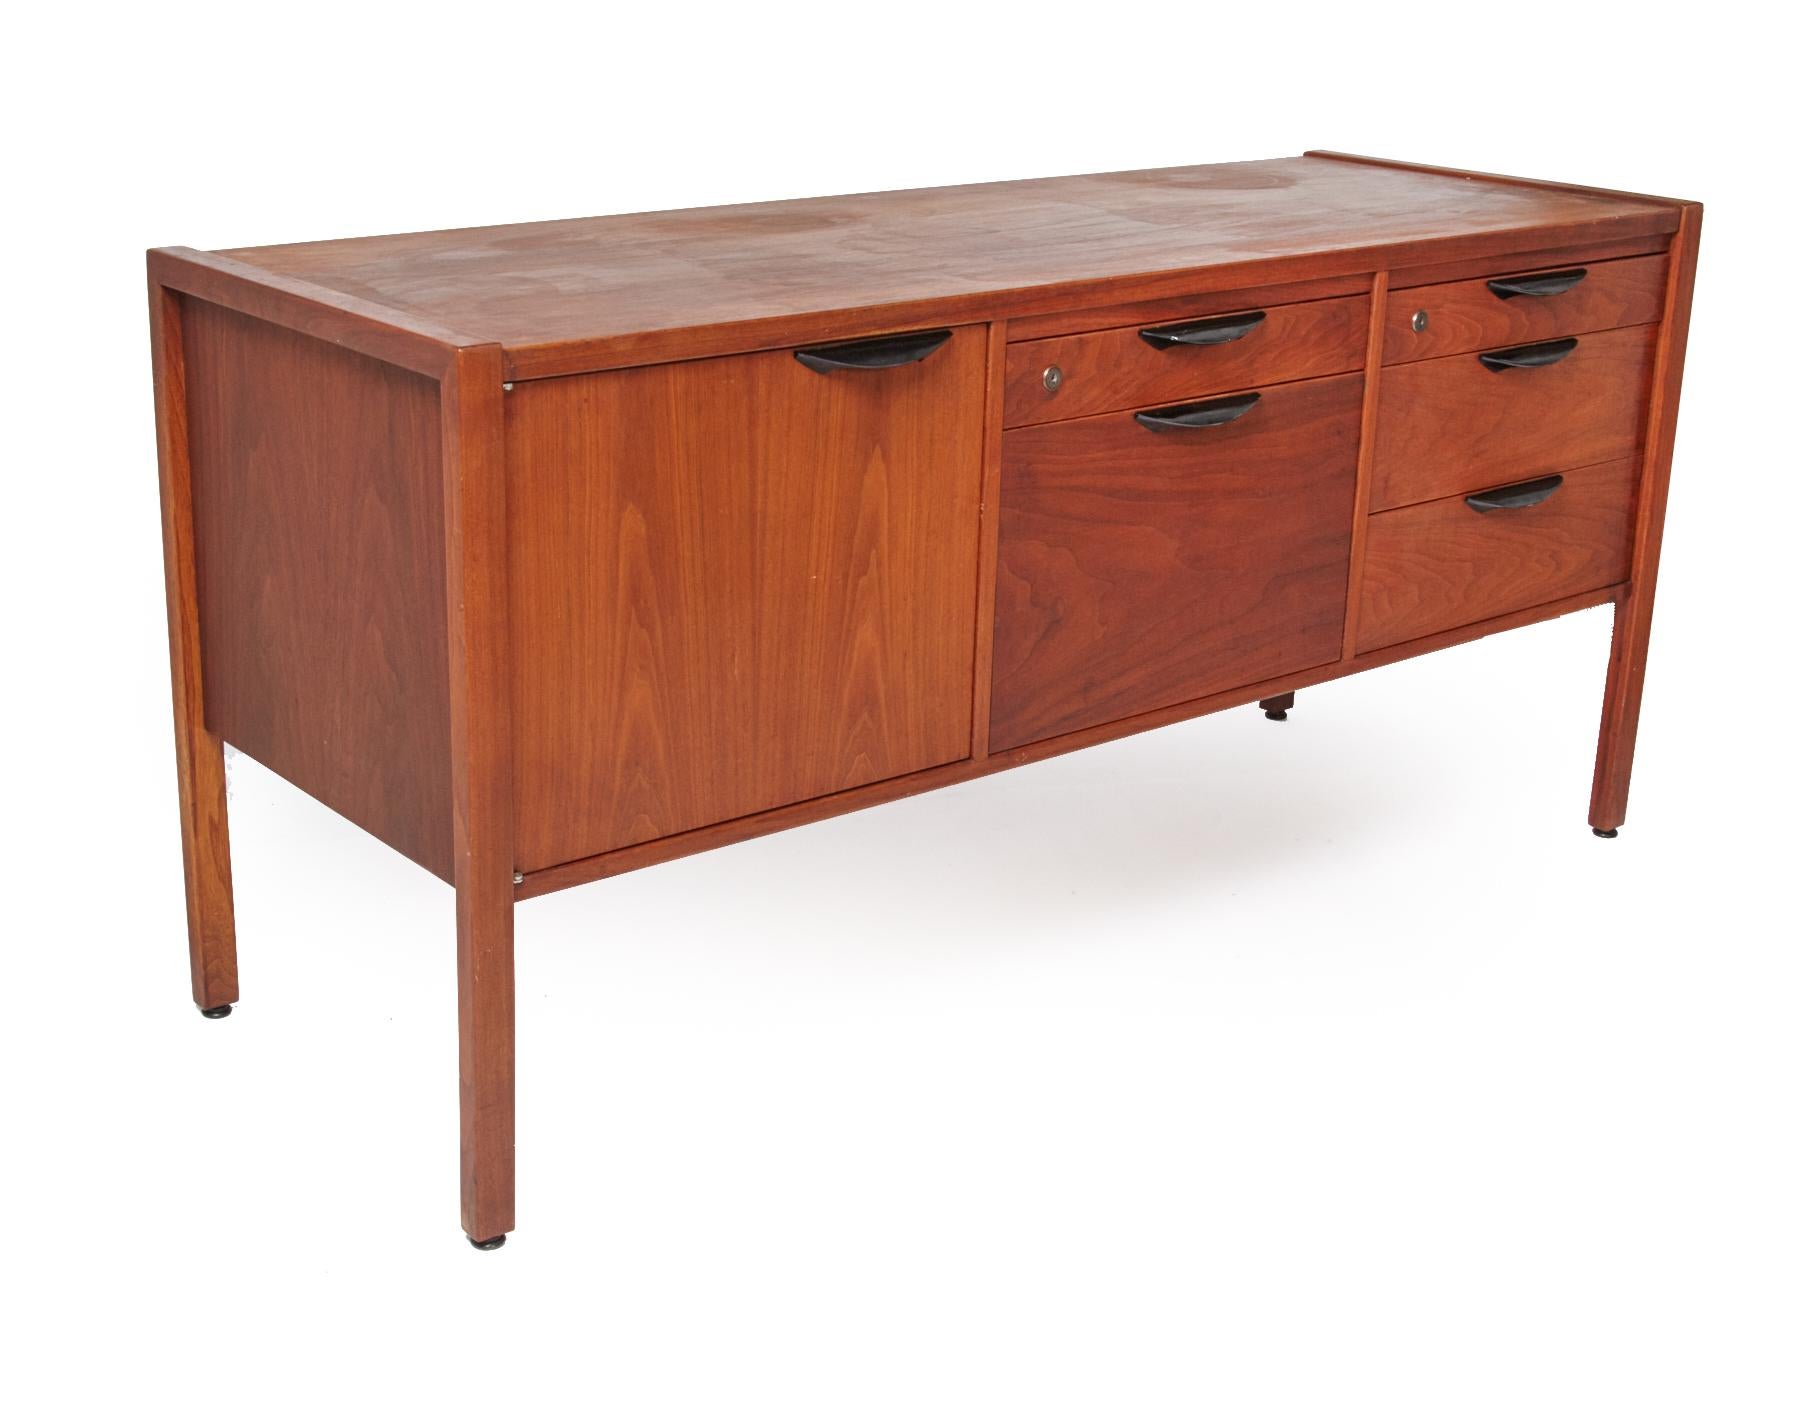 Nice walnut midcentury office / dining credenza by designer Jens Risom in excellent condition. Label is inside drawer. Piece has multiple drawers of various sizes including a file drawer at the center and a 2 shelf cupboard on the left. Drawer pulls